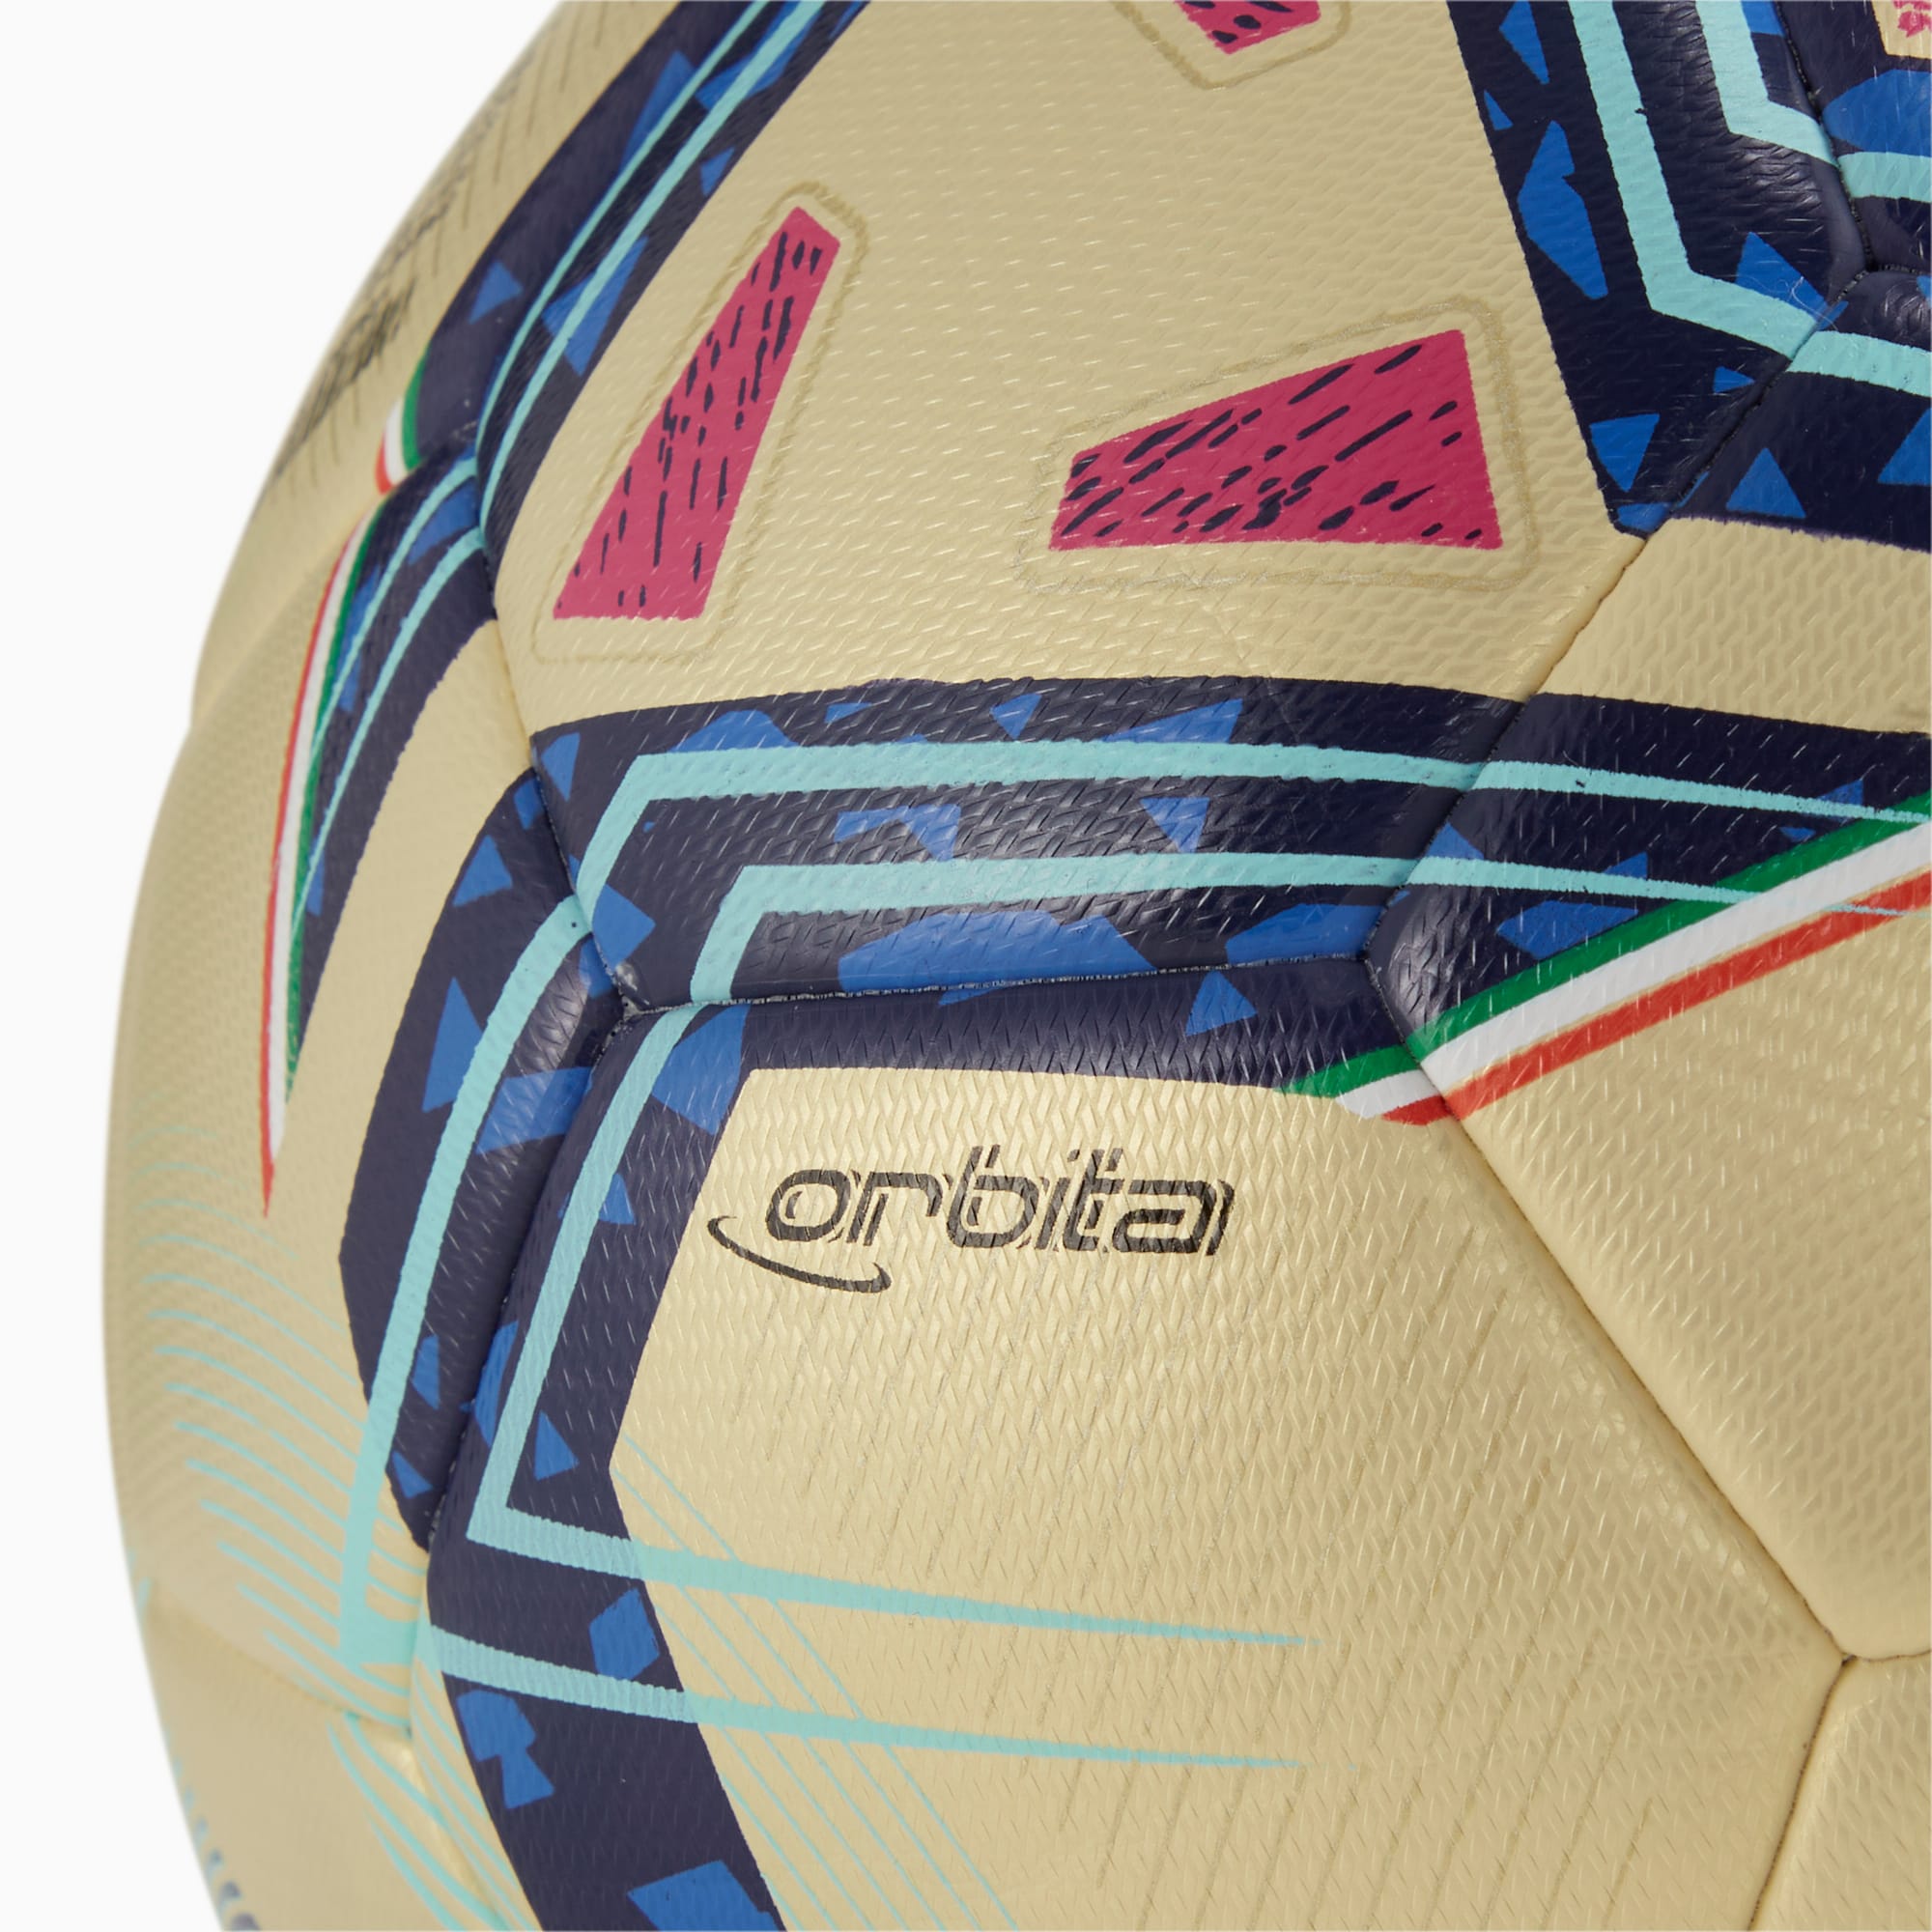 Women's PUMA Serie A Special Edition Hybrid Training Football, Gold/Blue Glimmer/Sunset Glow, Size 5, Accessories